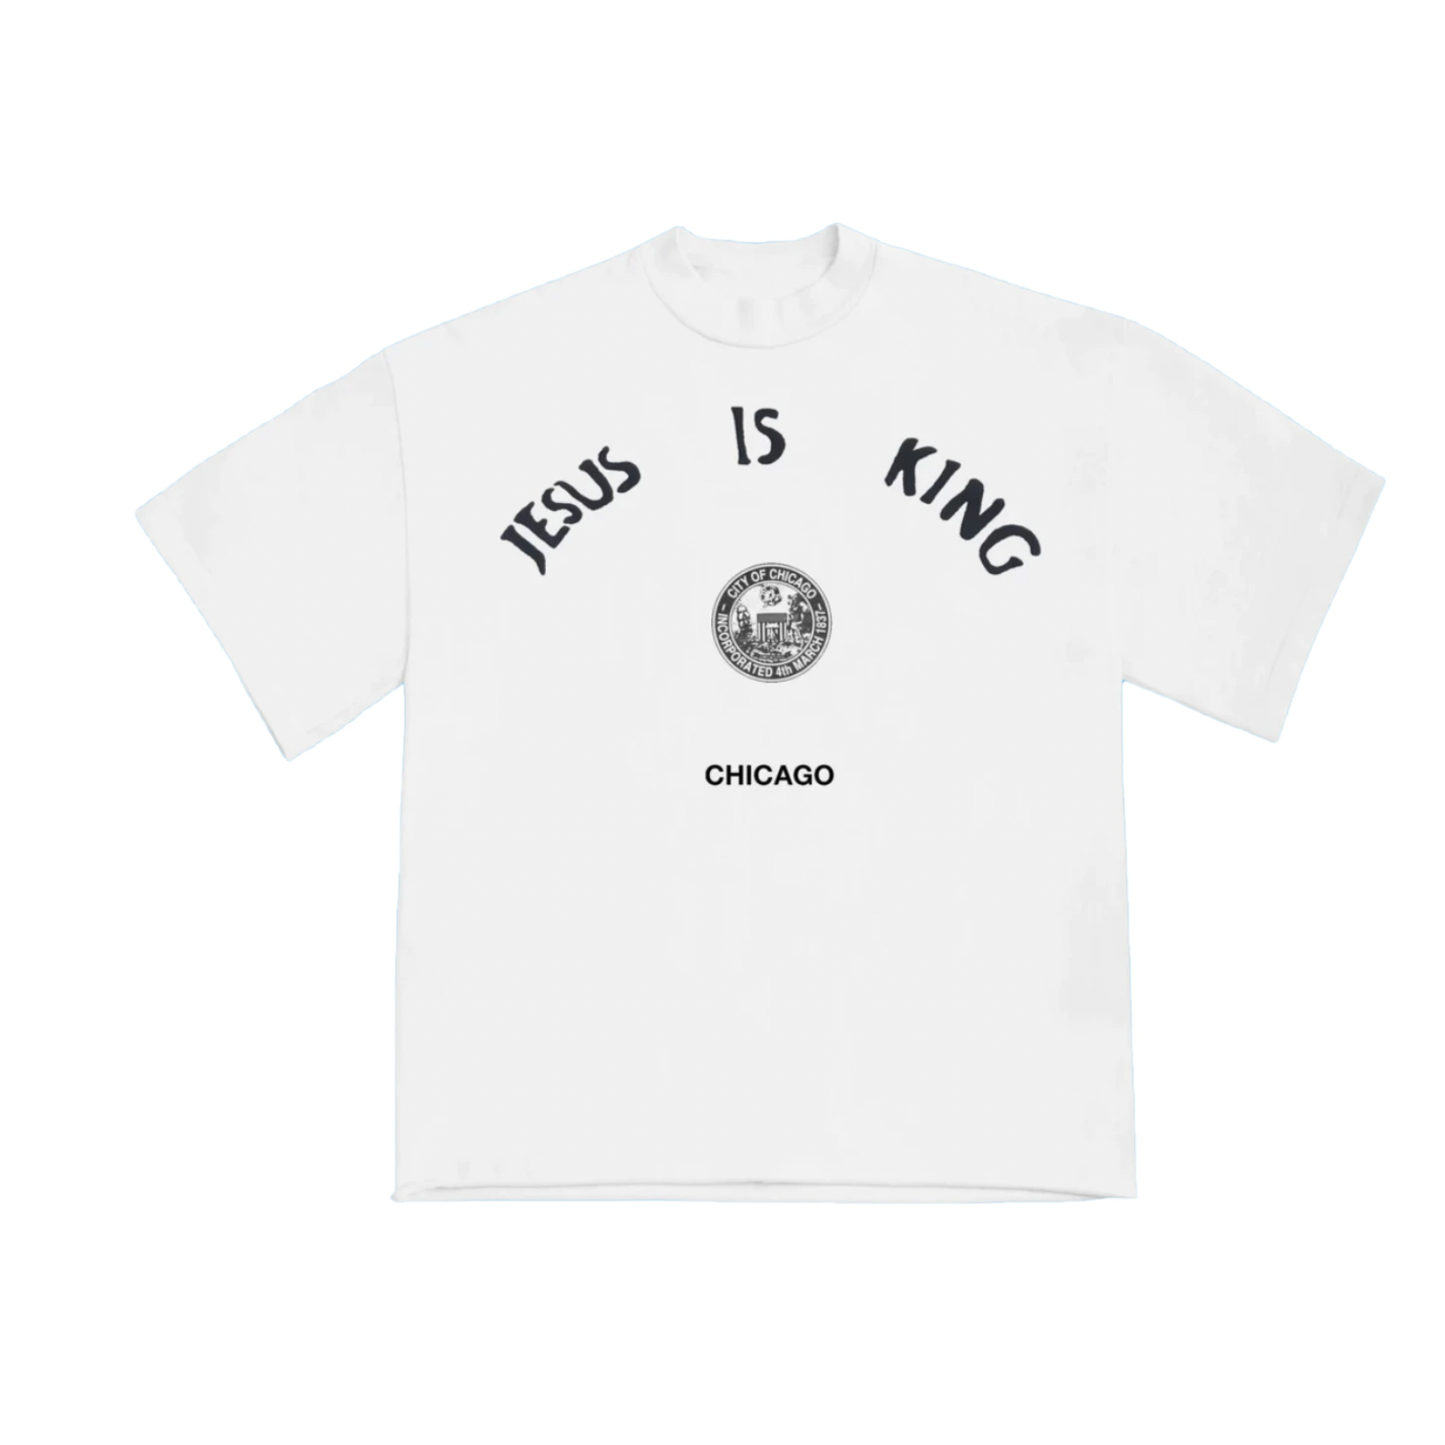 Jesus Is King Chicago Seal T-shirt White from Kanye West